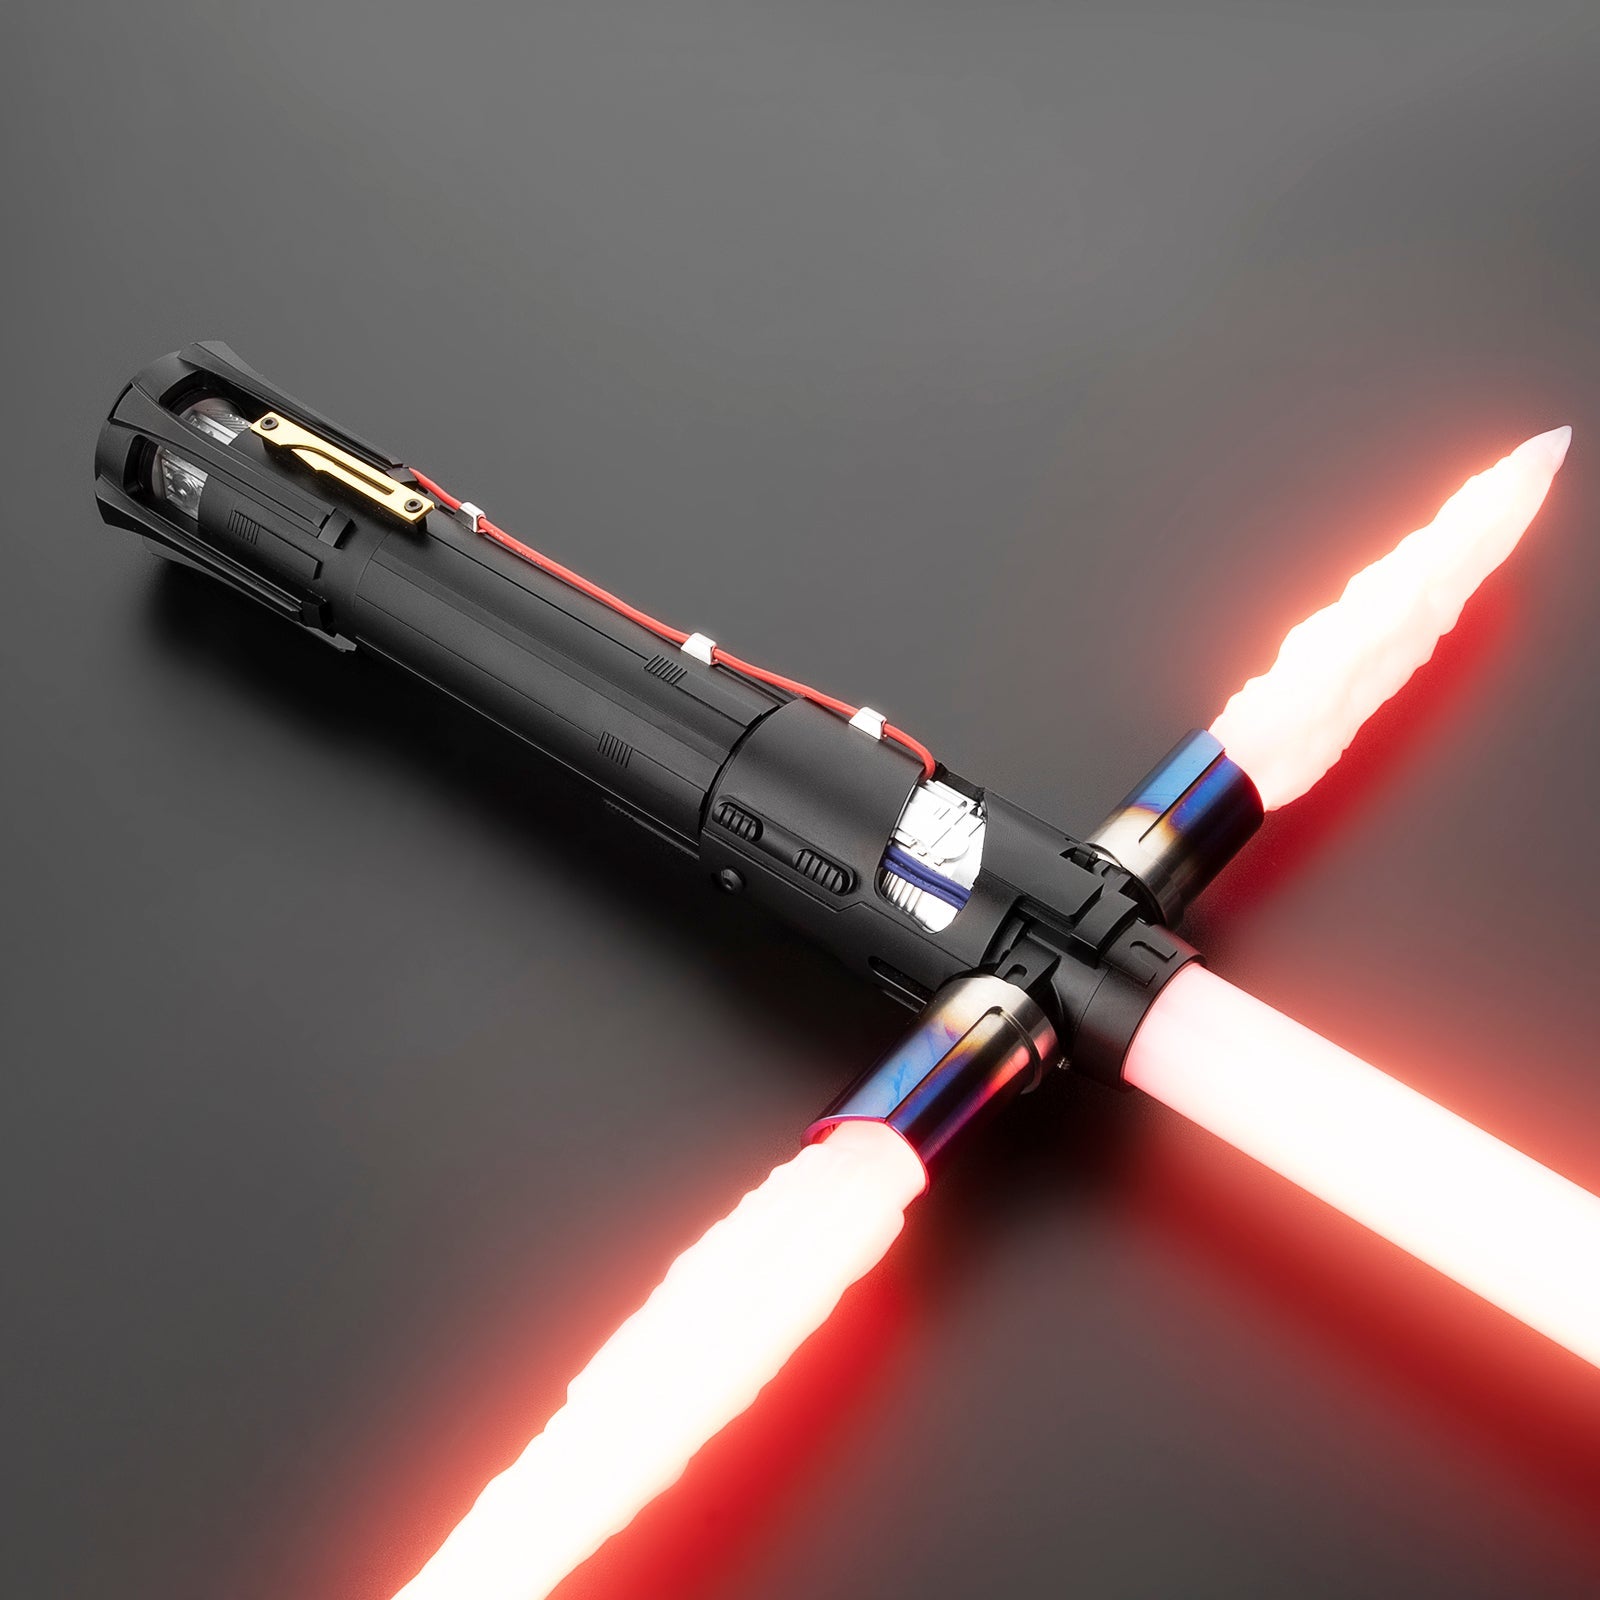 Tainted Saber (KR Inspired)